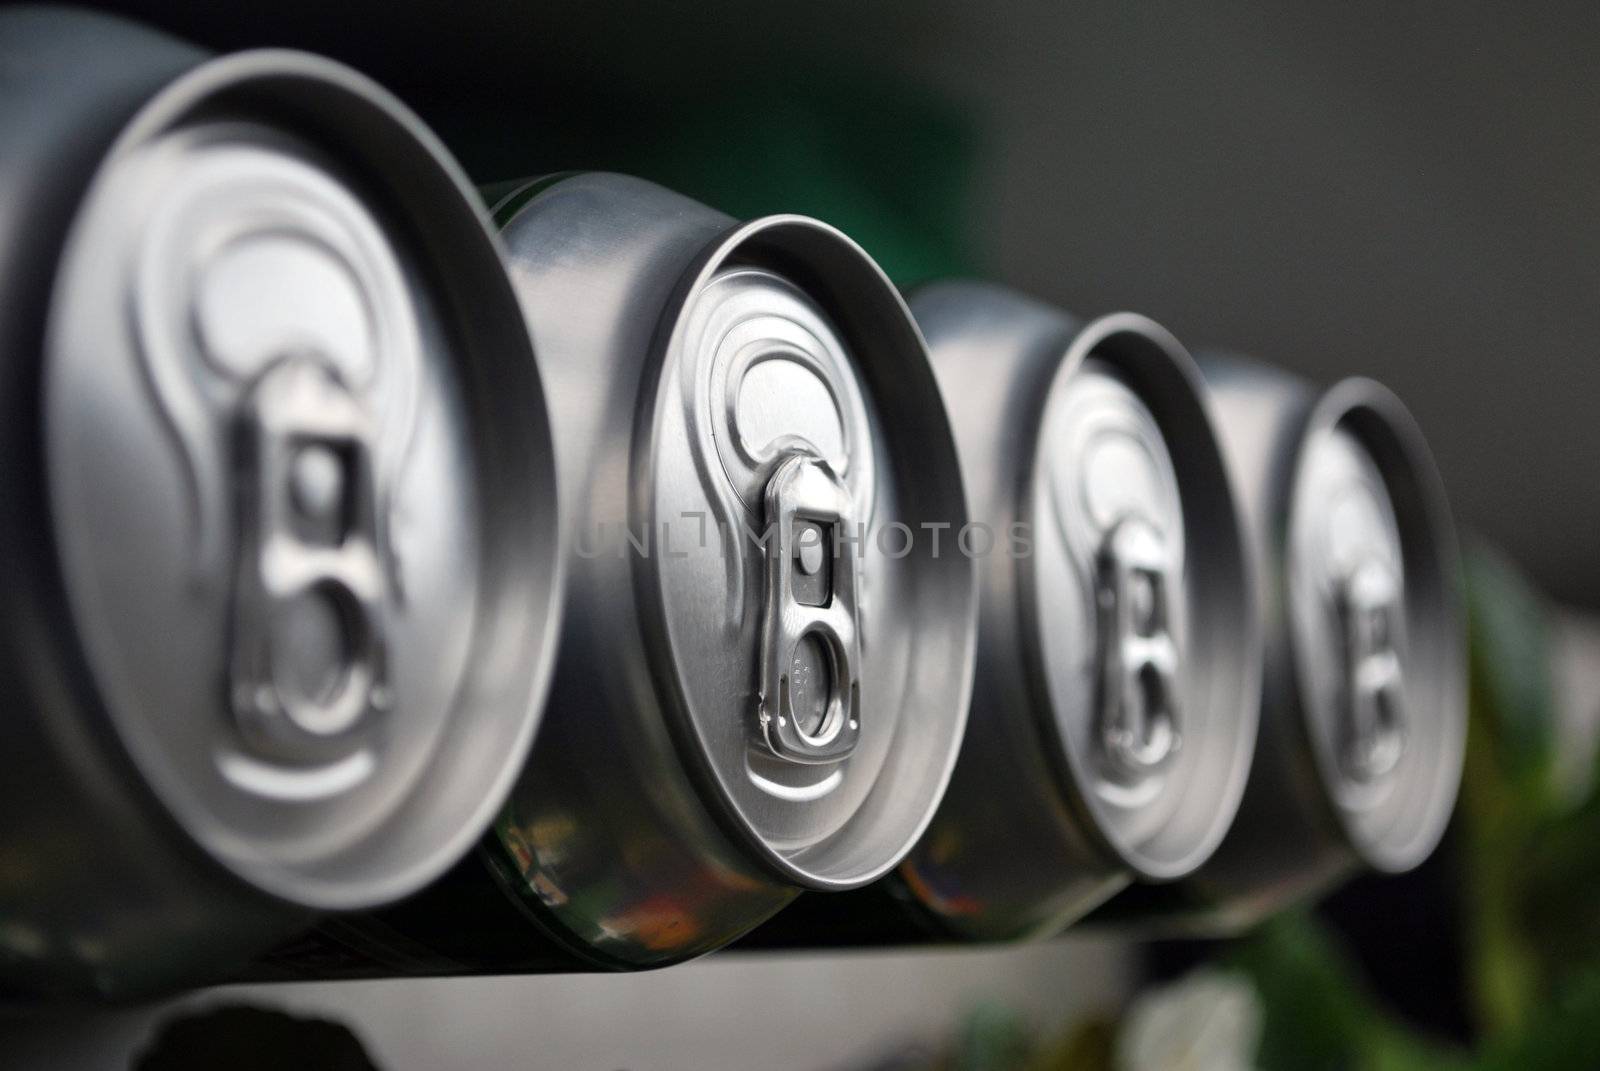 Beer Cans by tony4urban